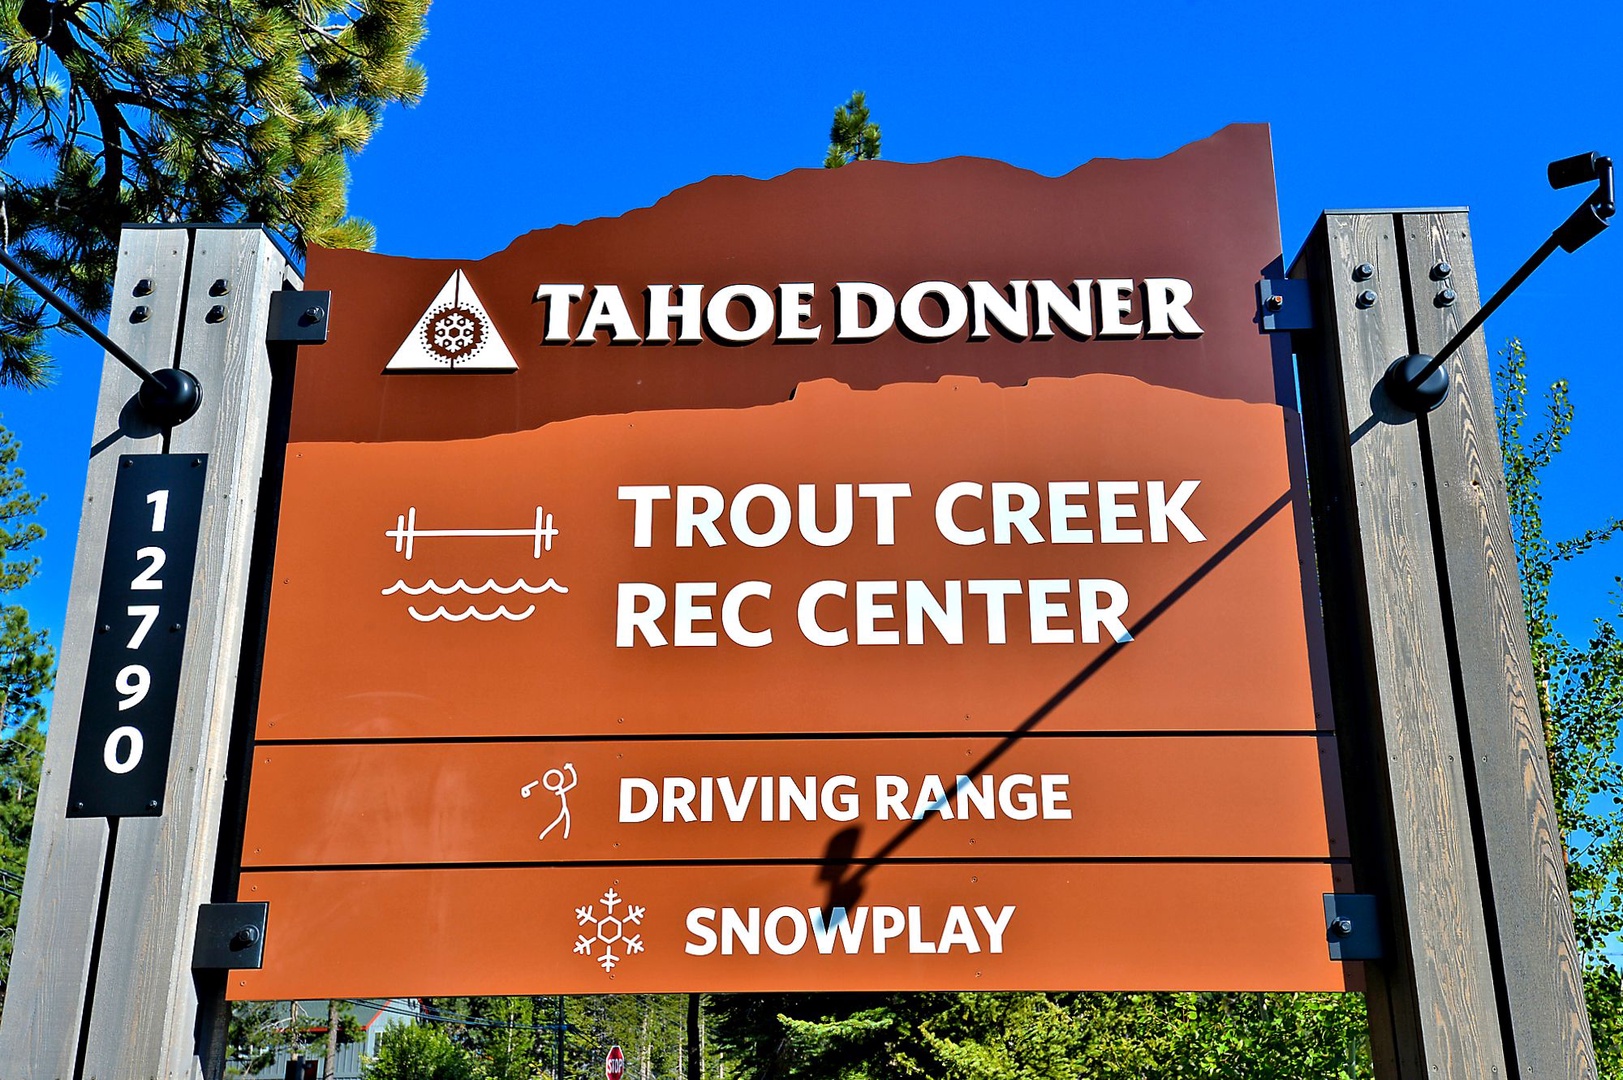 Trout Creek Rec Center: Three Pines Family Cabin